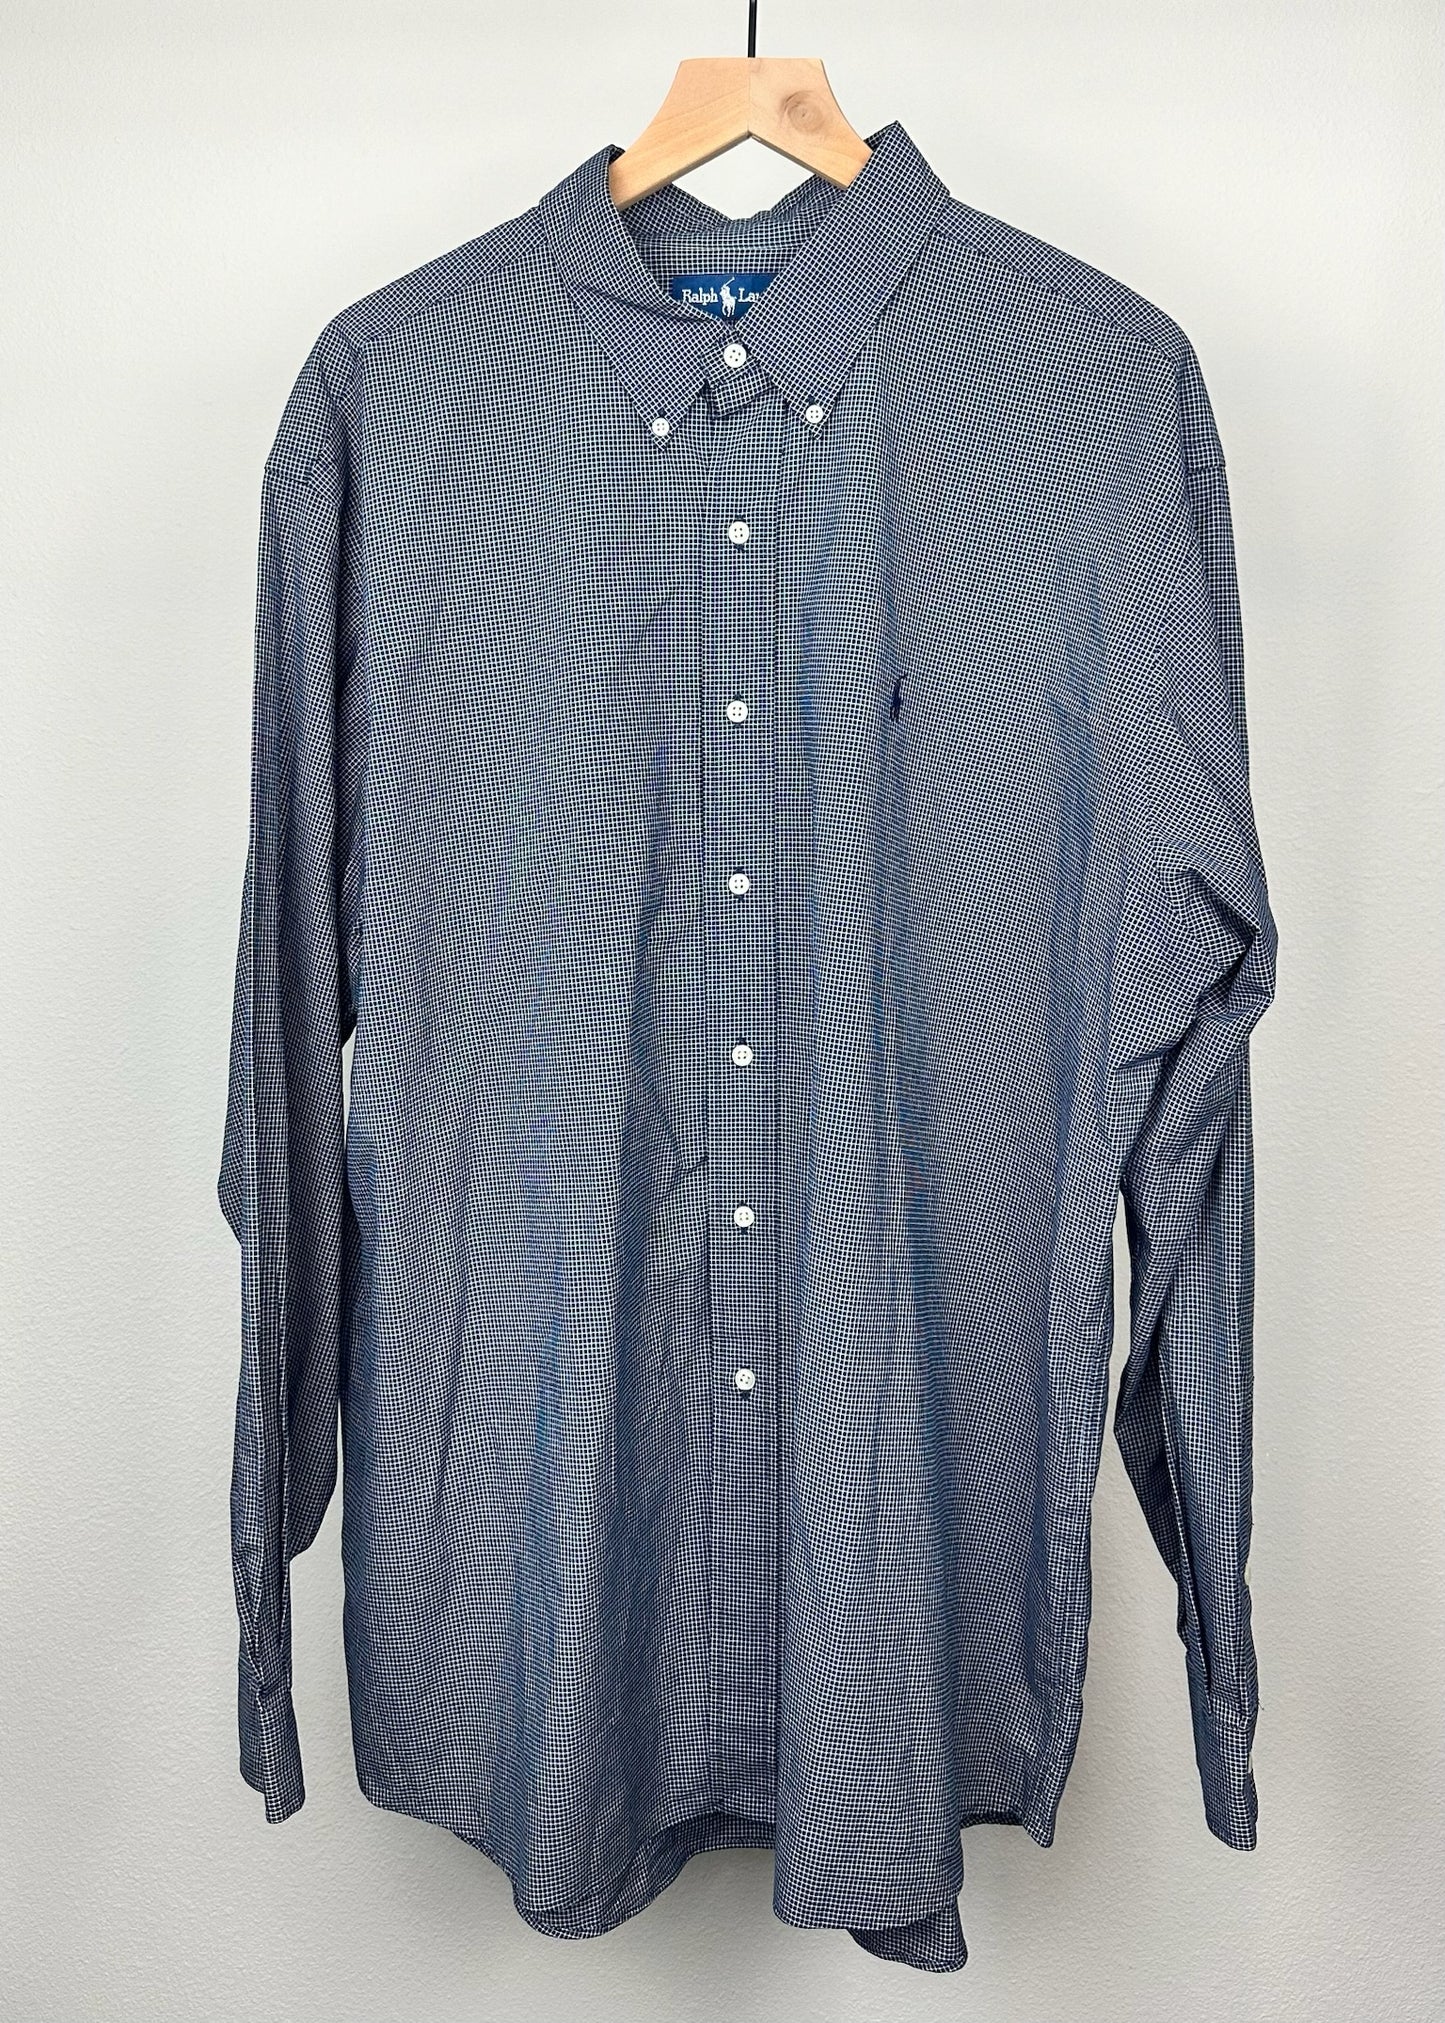 Blue Long Sleeve Button Up By Polo